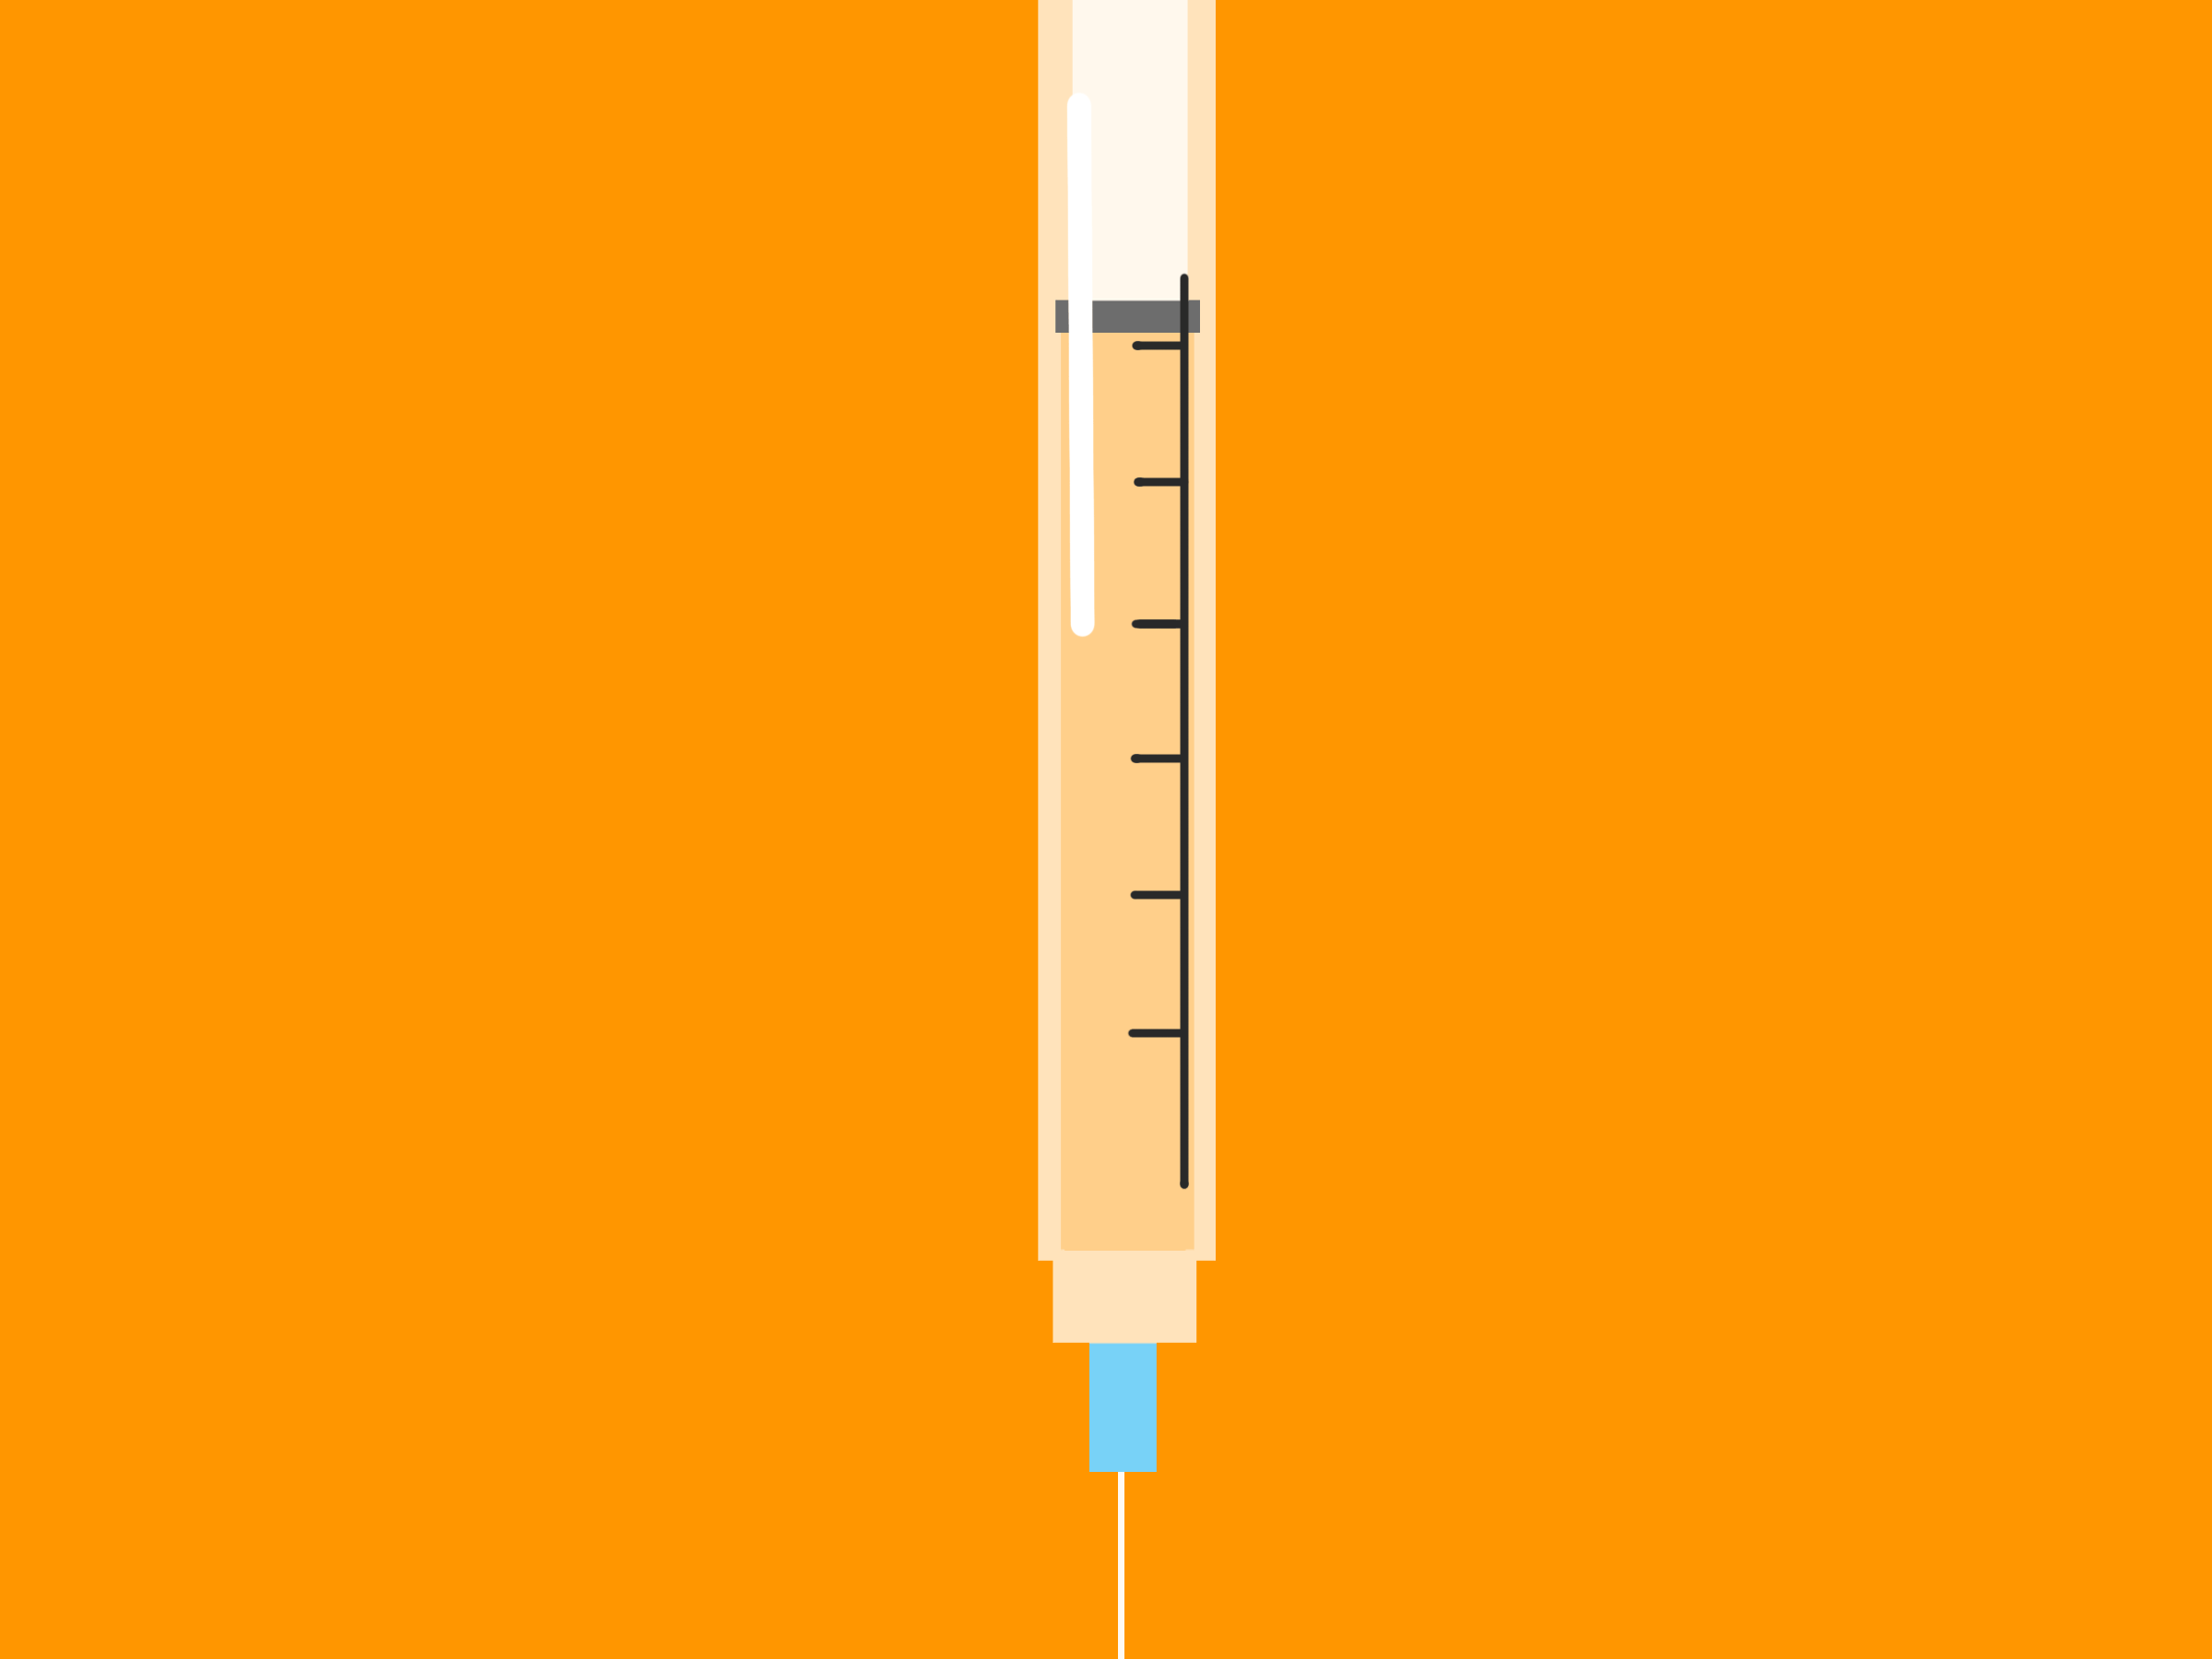 Illustration of a vaccine dose